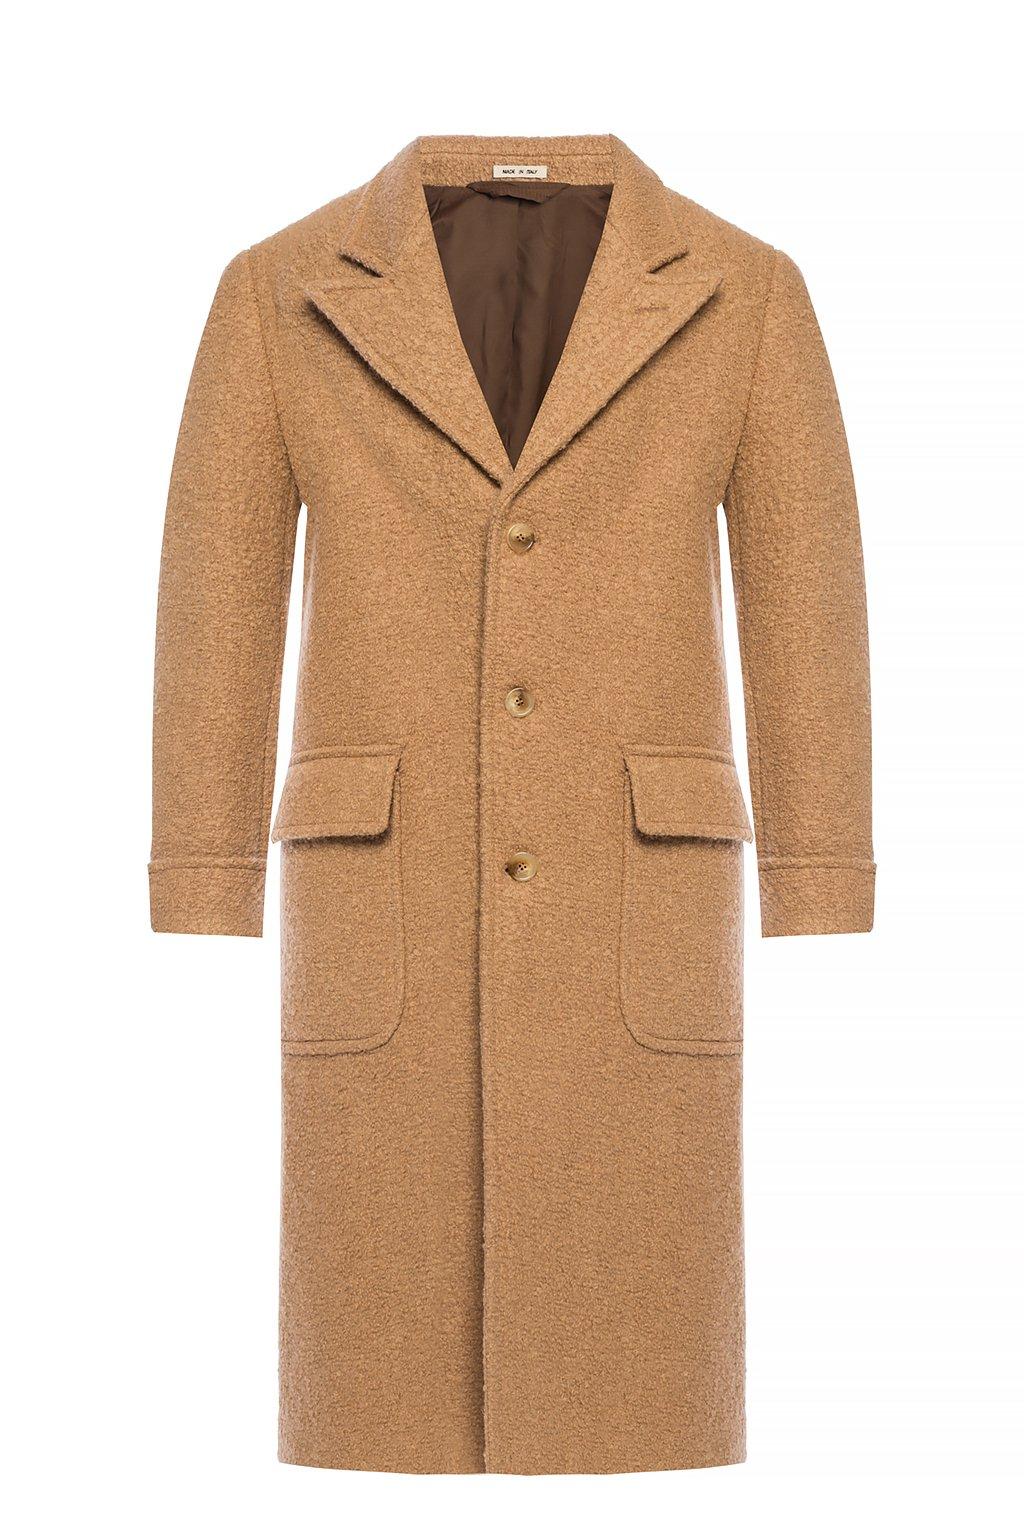 Marni Wool Coat With Pockets in Beige (Natural) for Men - Lyst